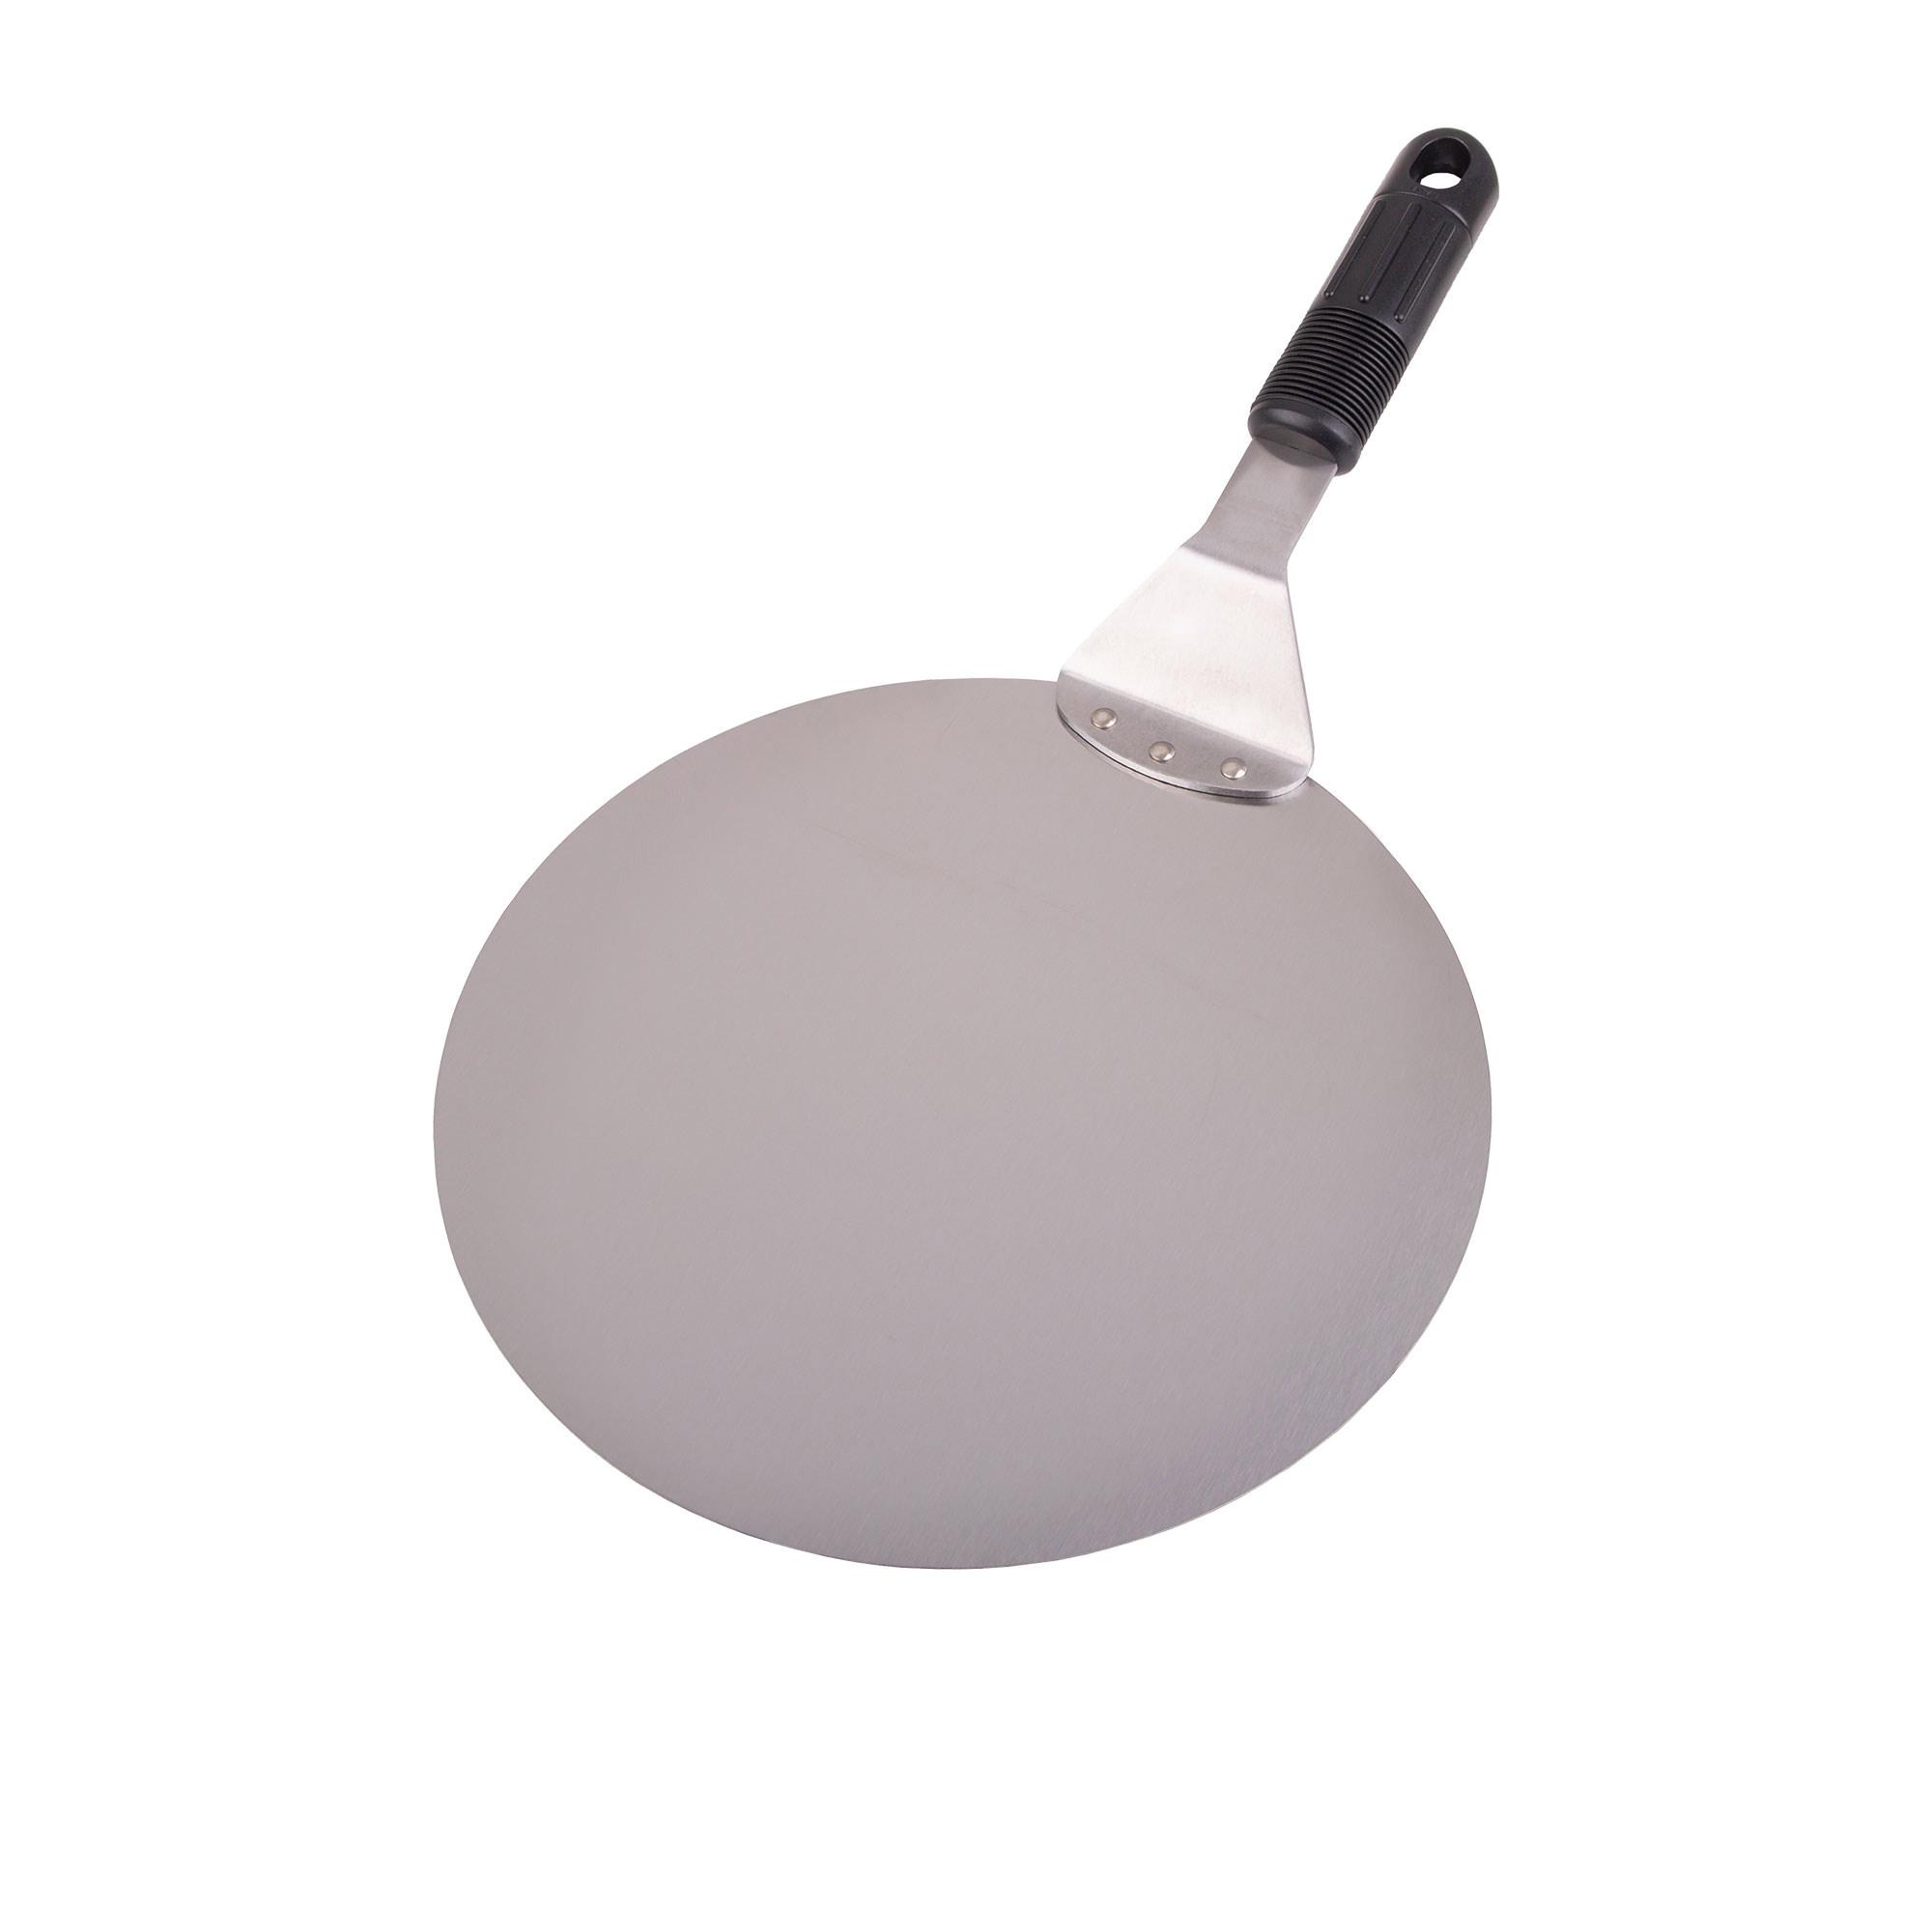 Al Dente Stainless Steel Pizza Lifter 25cm Image 1